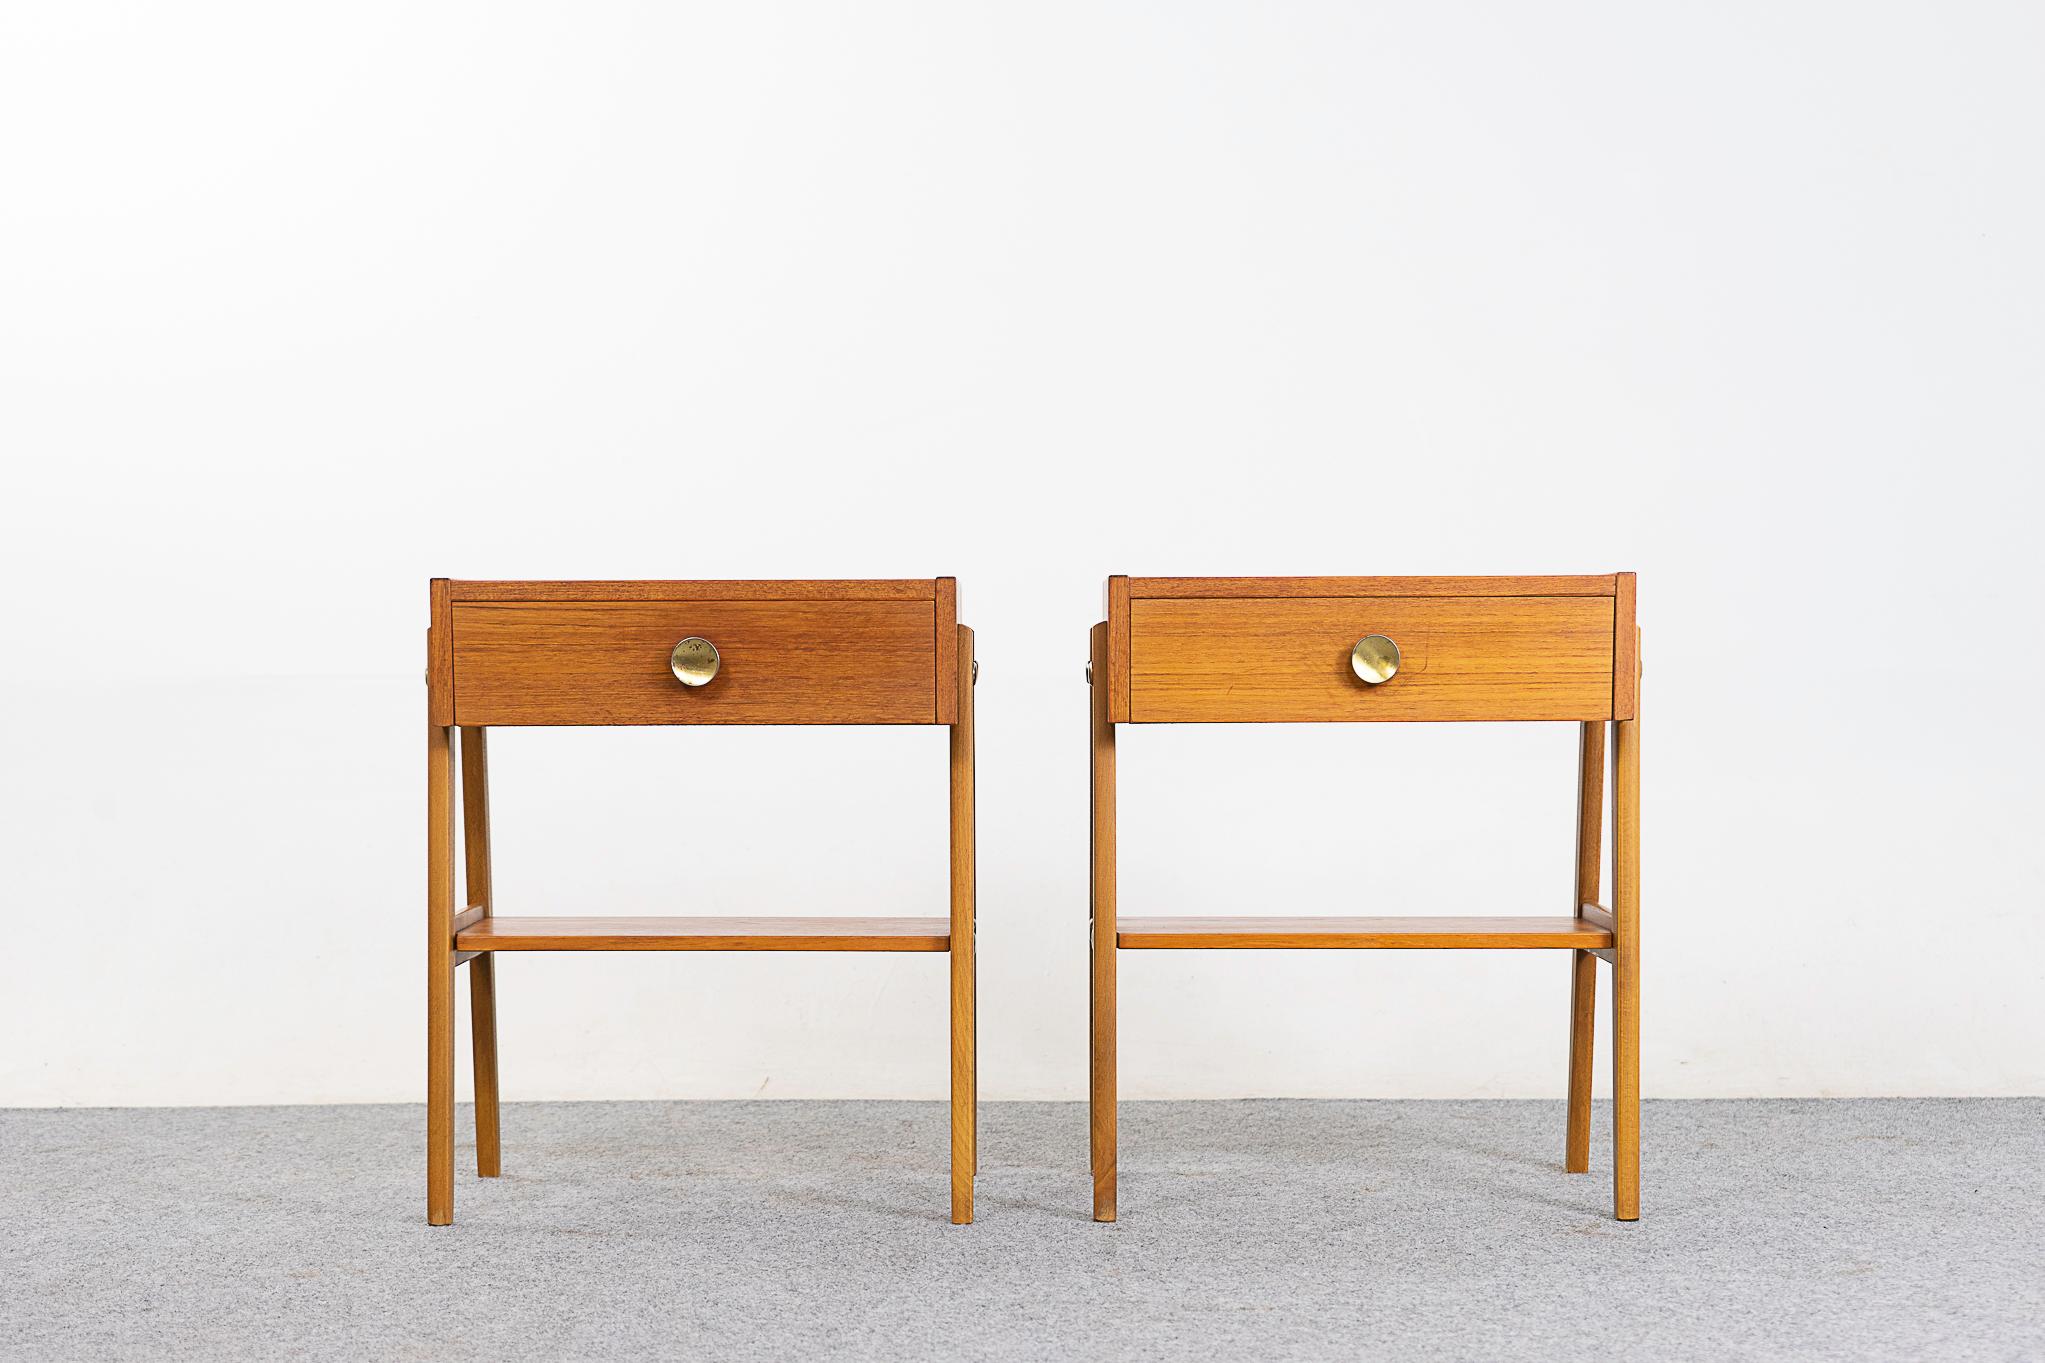 Teak midcentury bedside pair, circa 1960s. Slender splayed legs and hady shelf. Dovetailed drawer with metal pull offers storage for small items. 

Unrestored item, some very minor marks consistent with age.

Please inquire for international